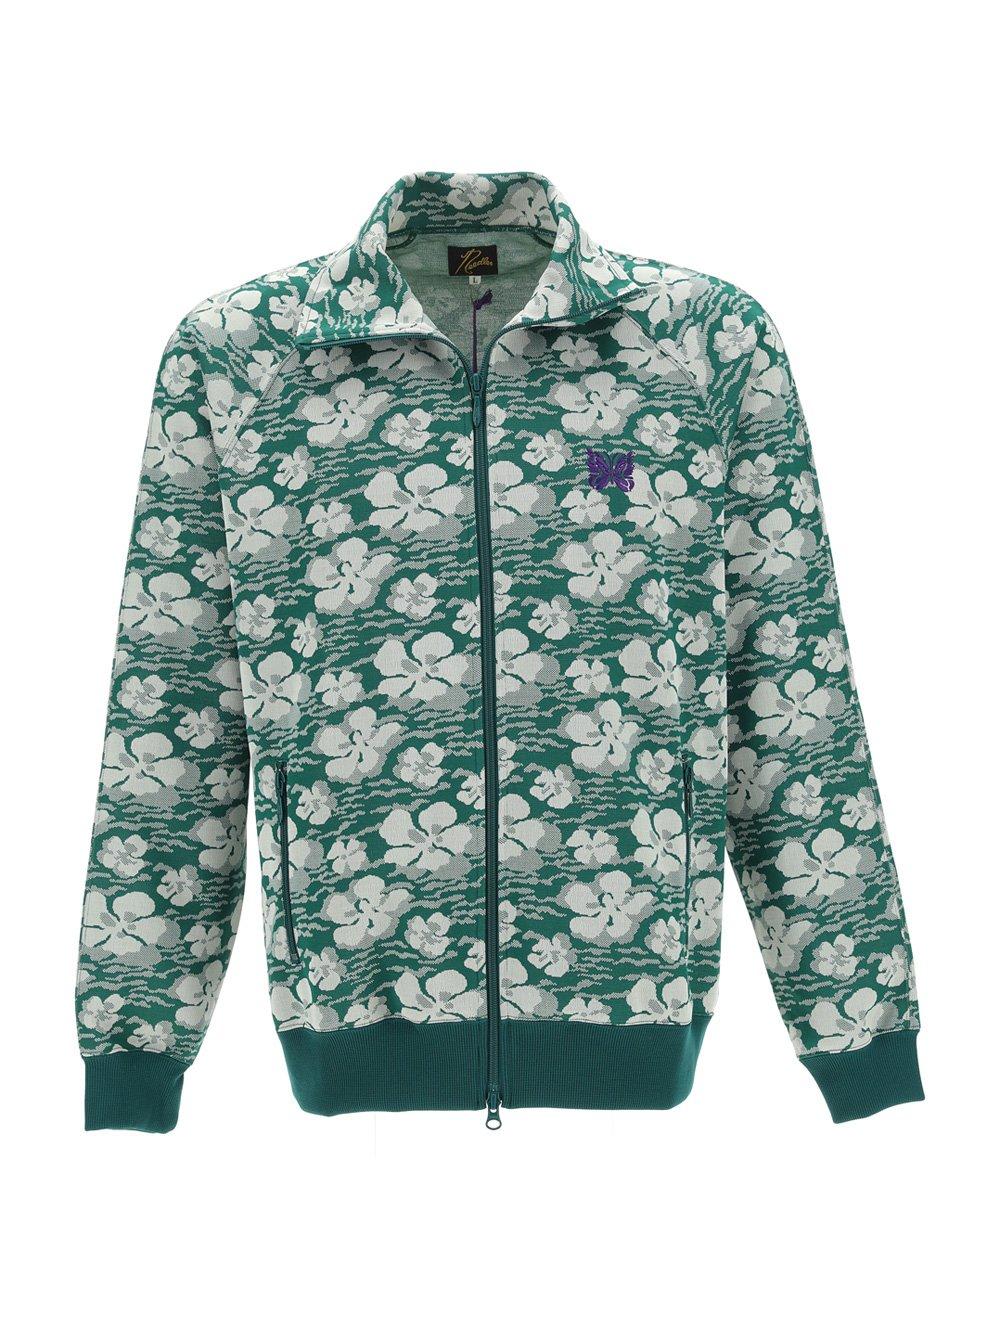 Needles All-over Printed Zip-up Long-sleeved Jacket